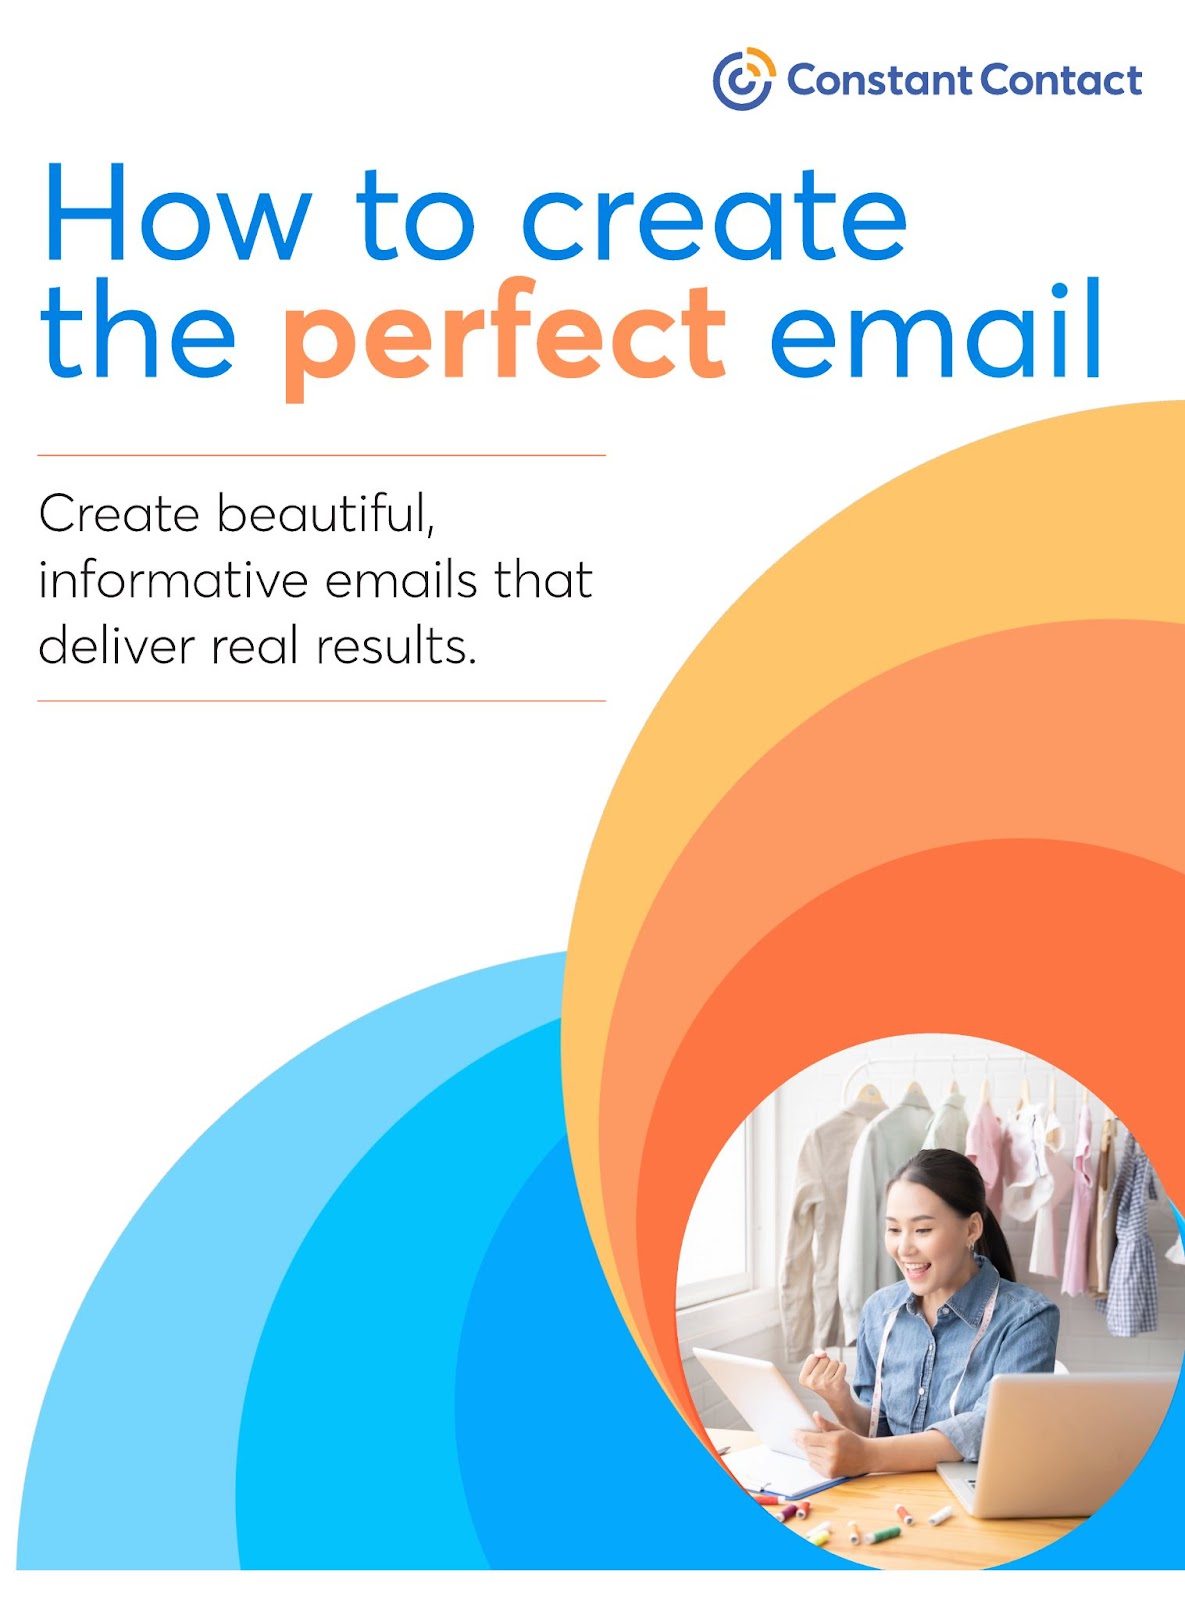 How to Create the Perfect Email ebook from Constant Contact